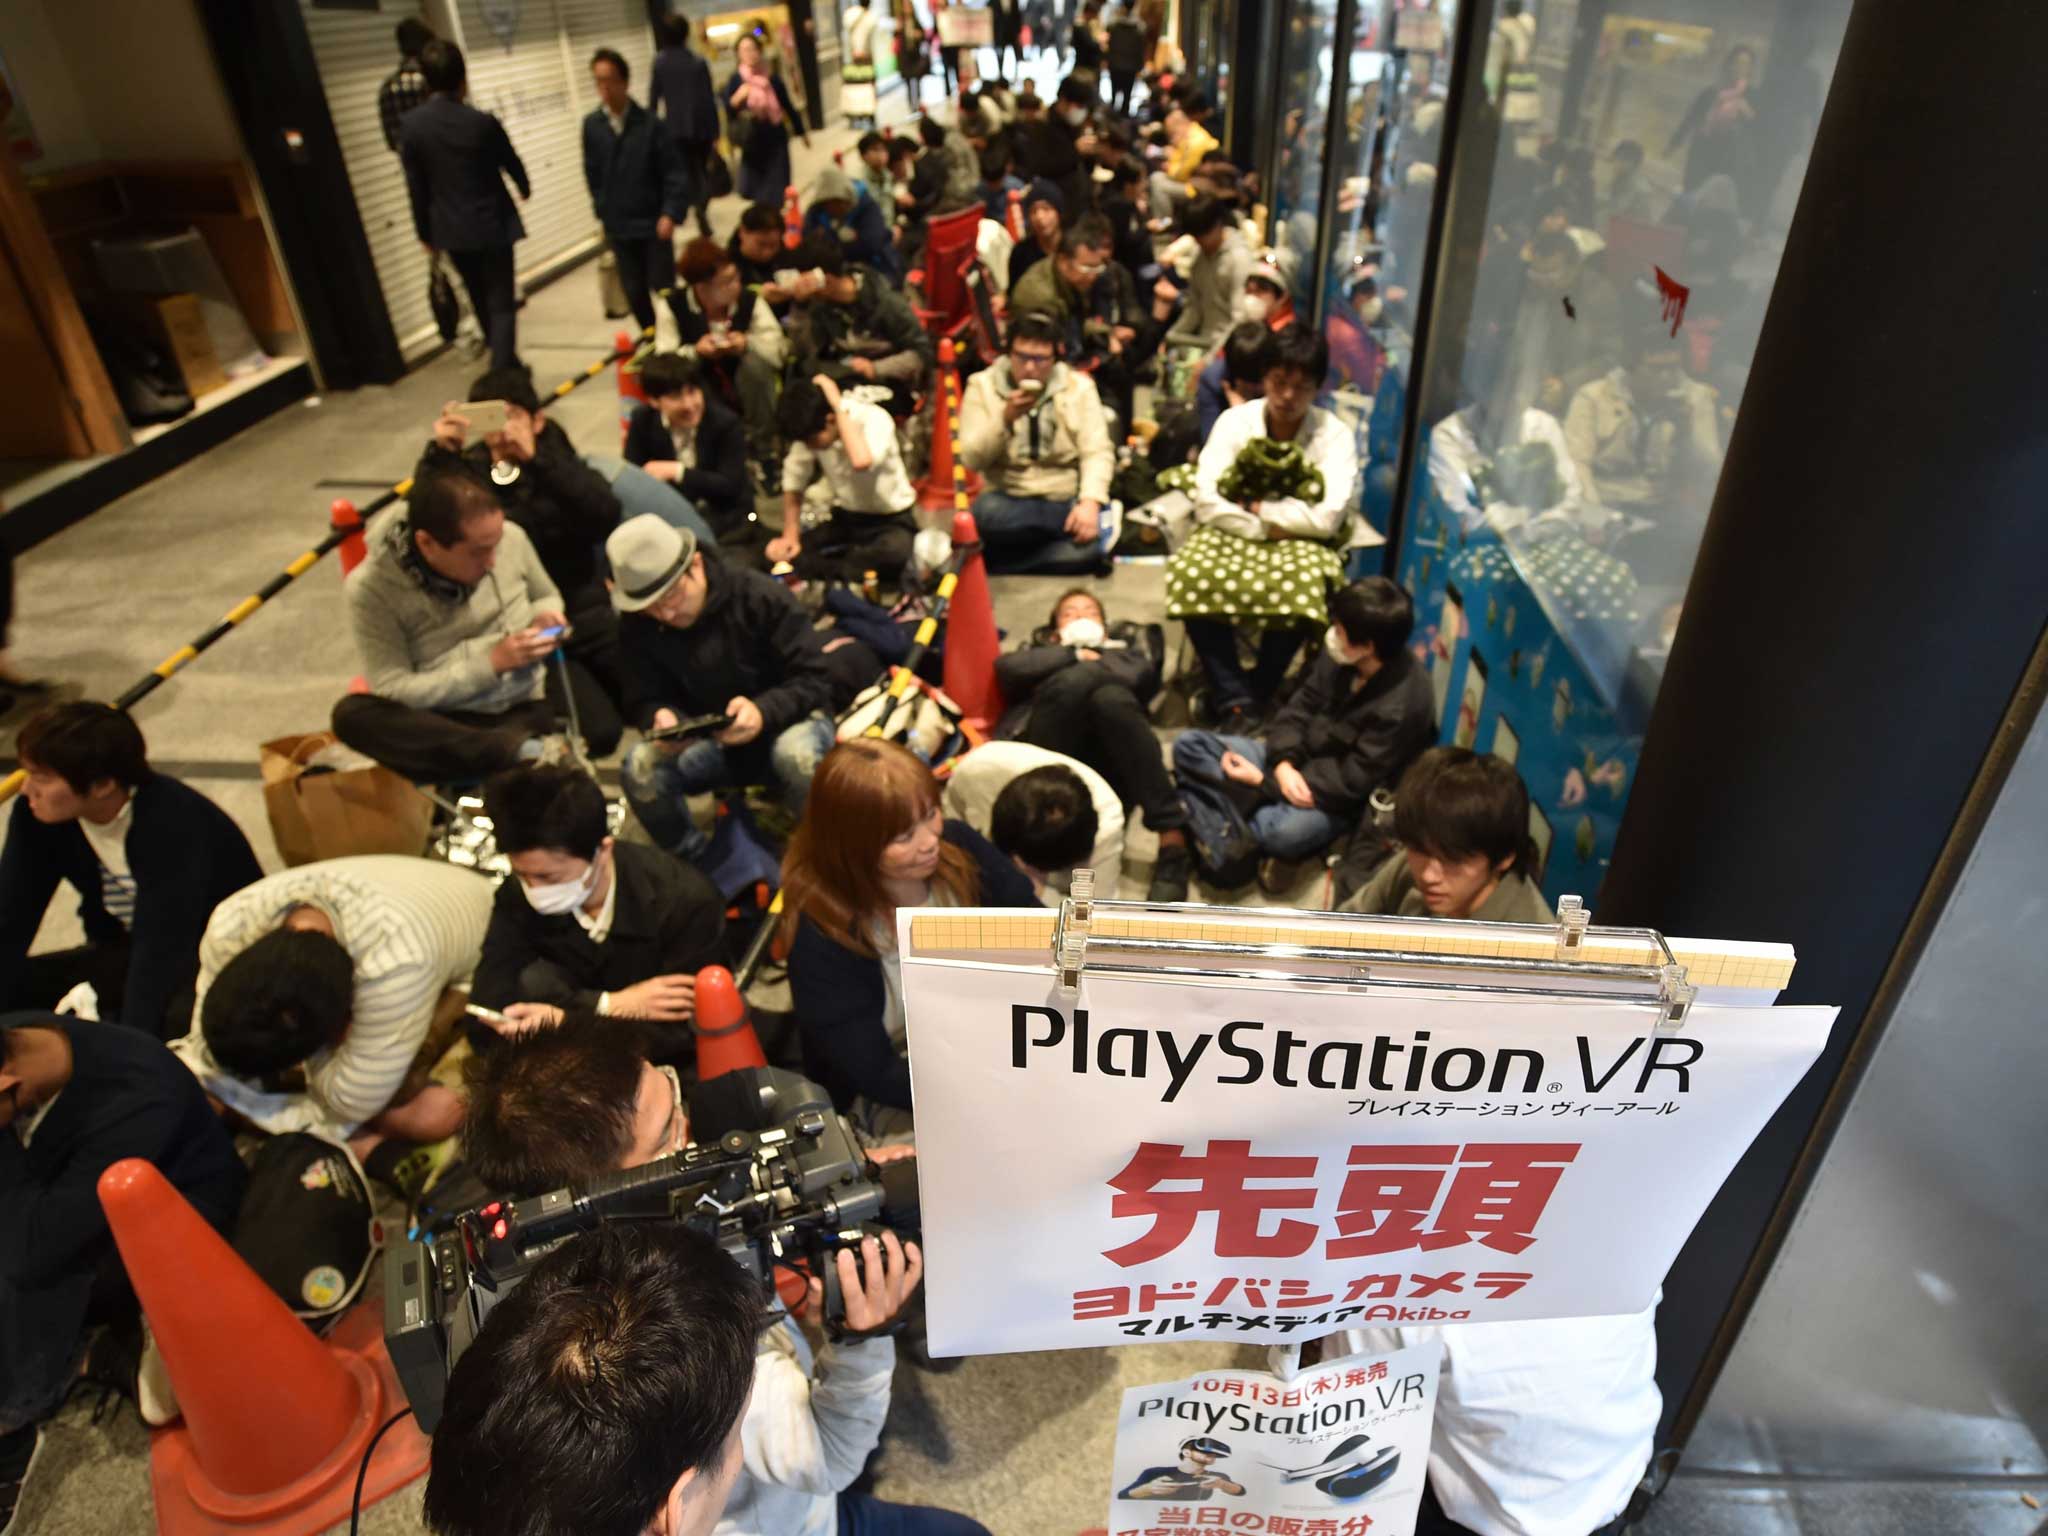 Customers wait in line to buy the Sony PlayStation virtual reality (PSVR) headset at the entrance of an electronics retail shop before its opening hours in Tokyo